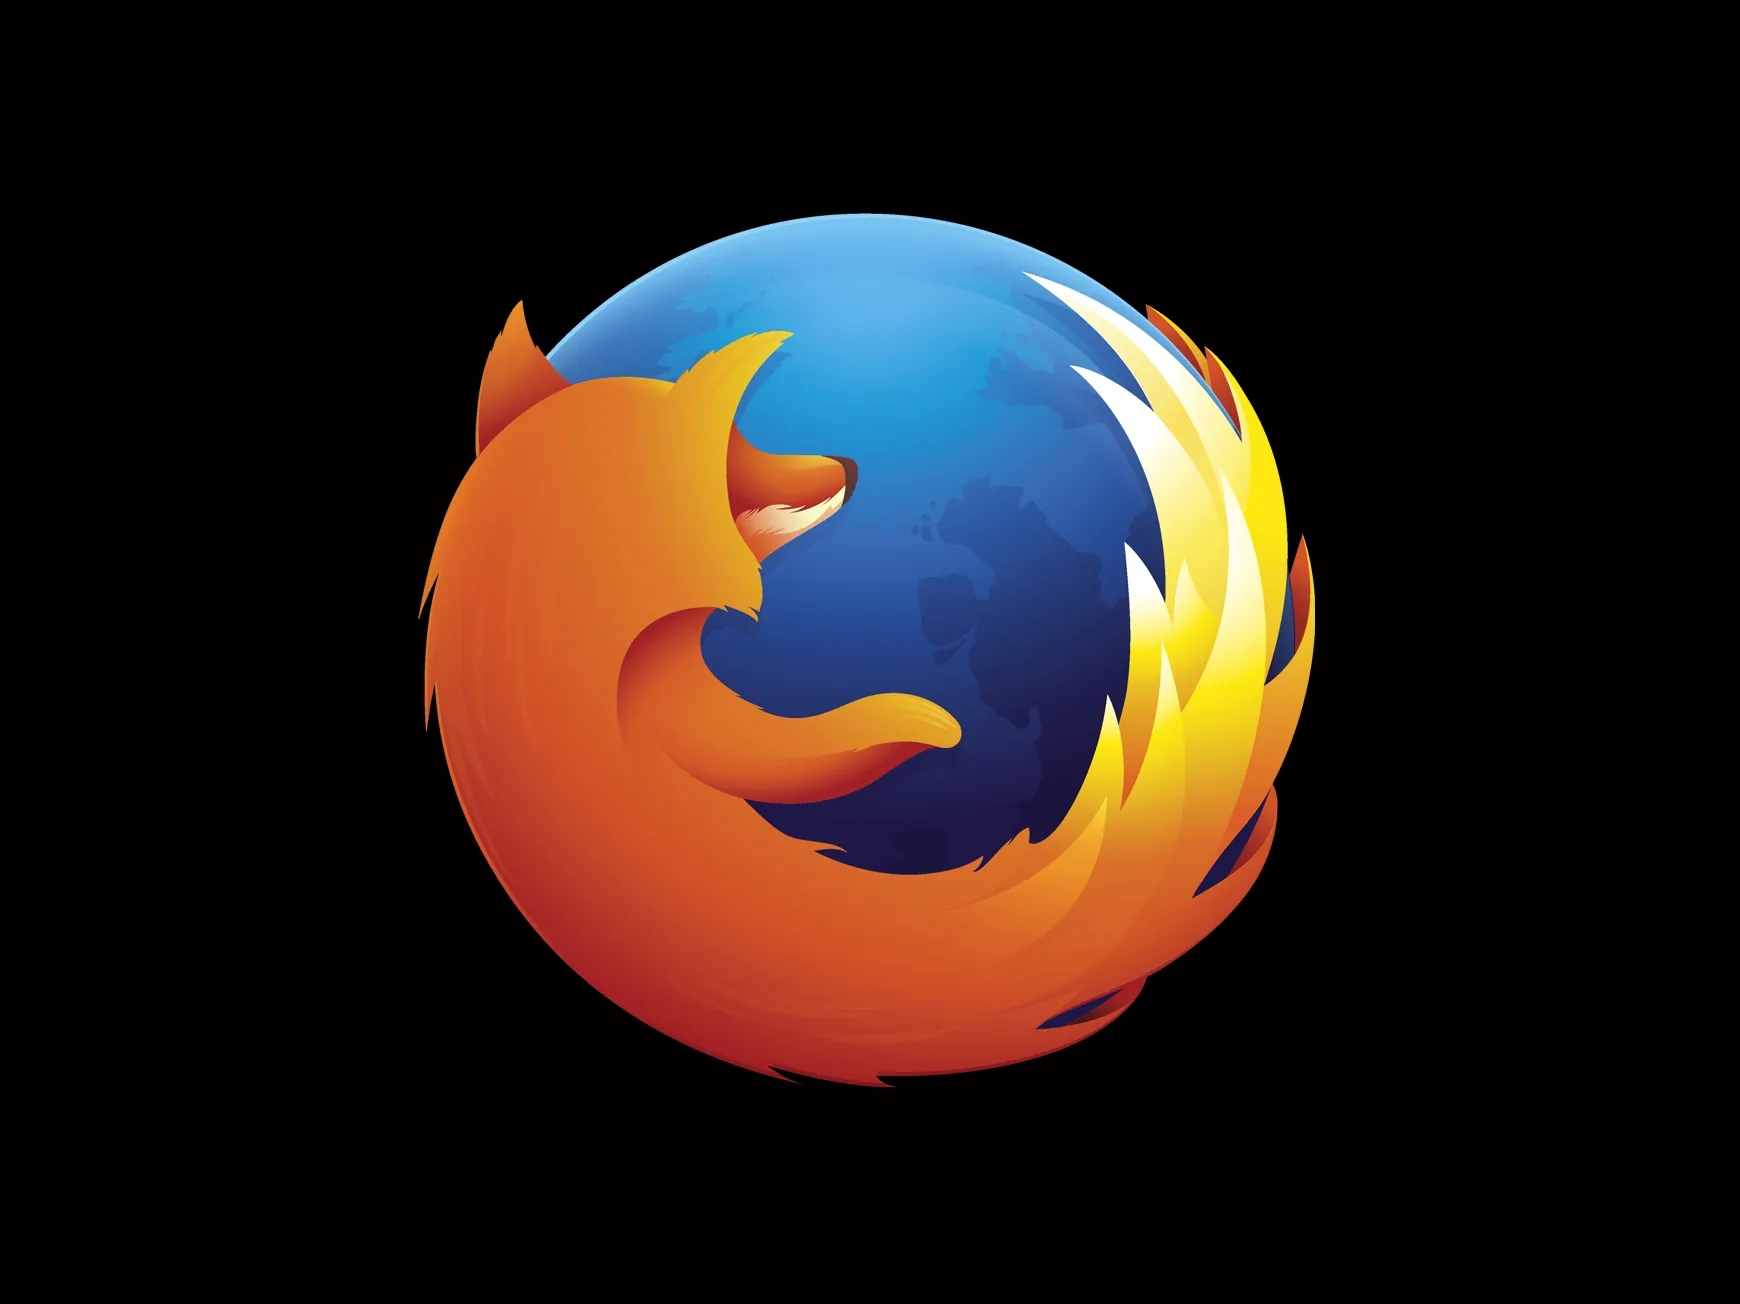 How to revert Firefox 91+ from saving temporary files to the Downloads folder